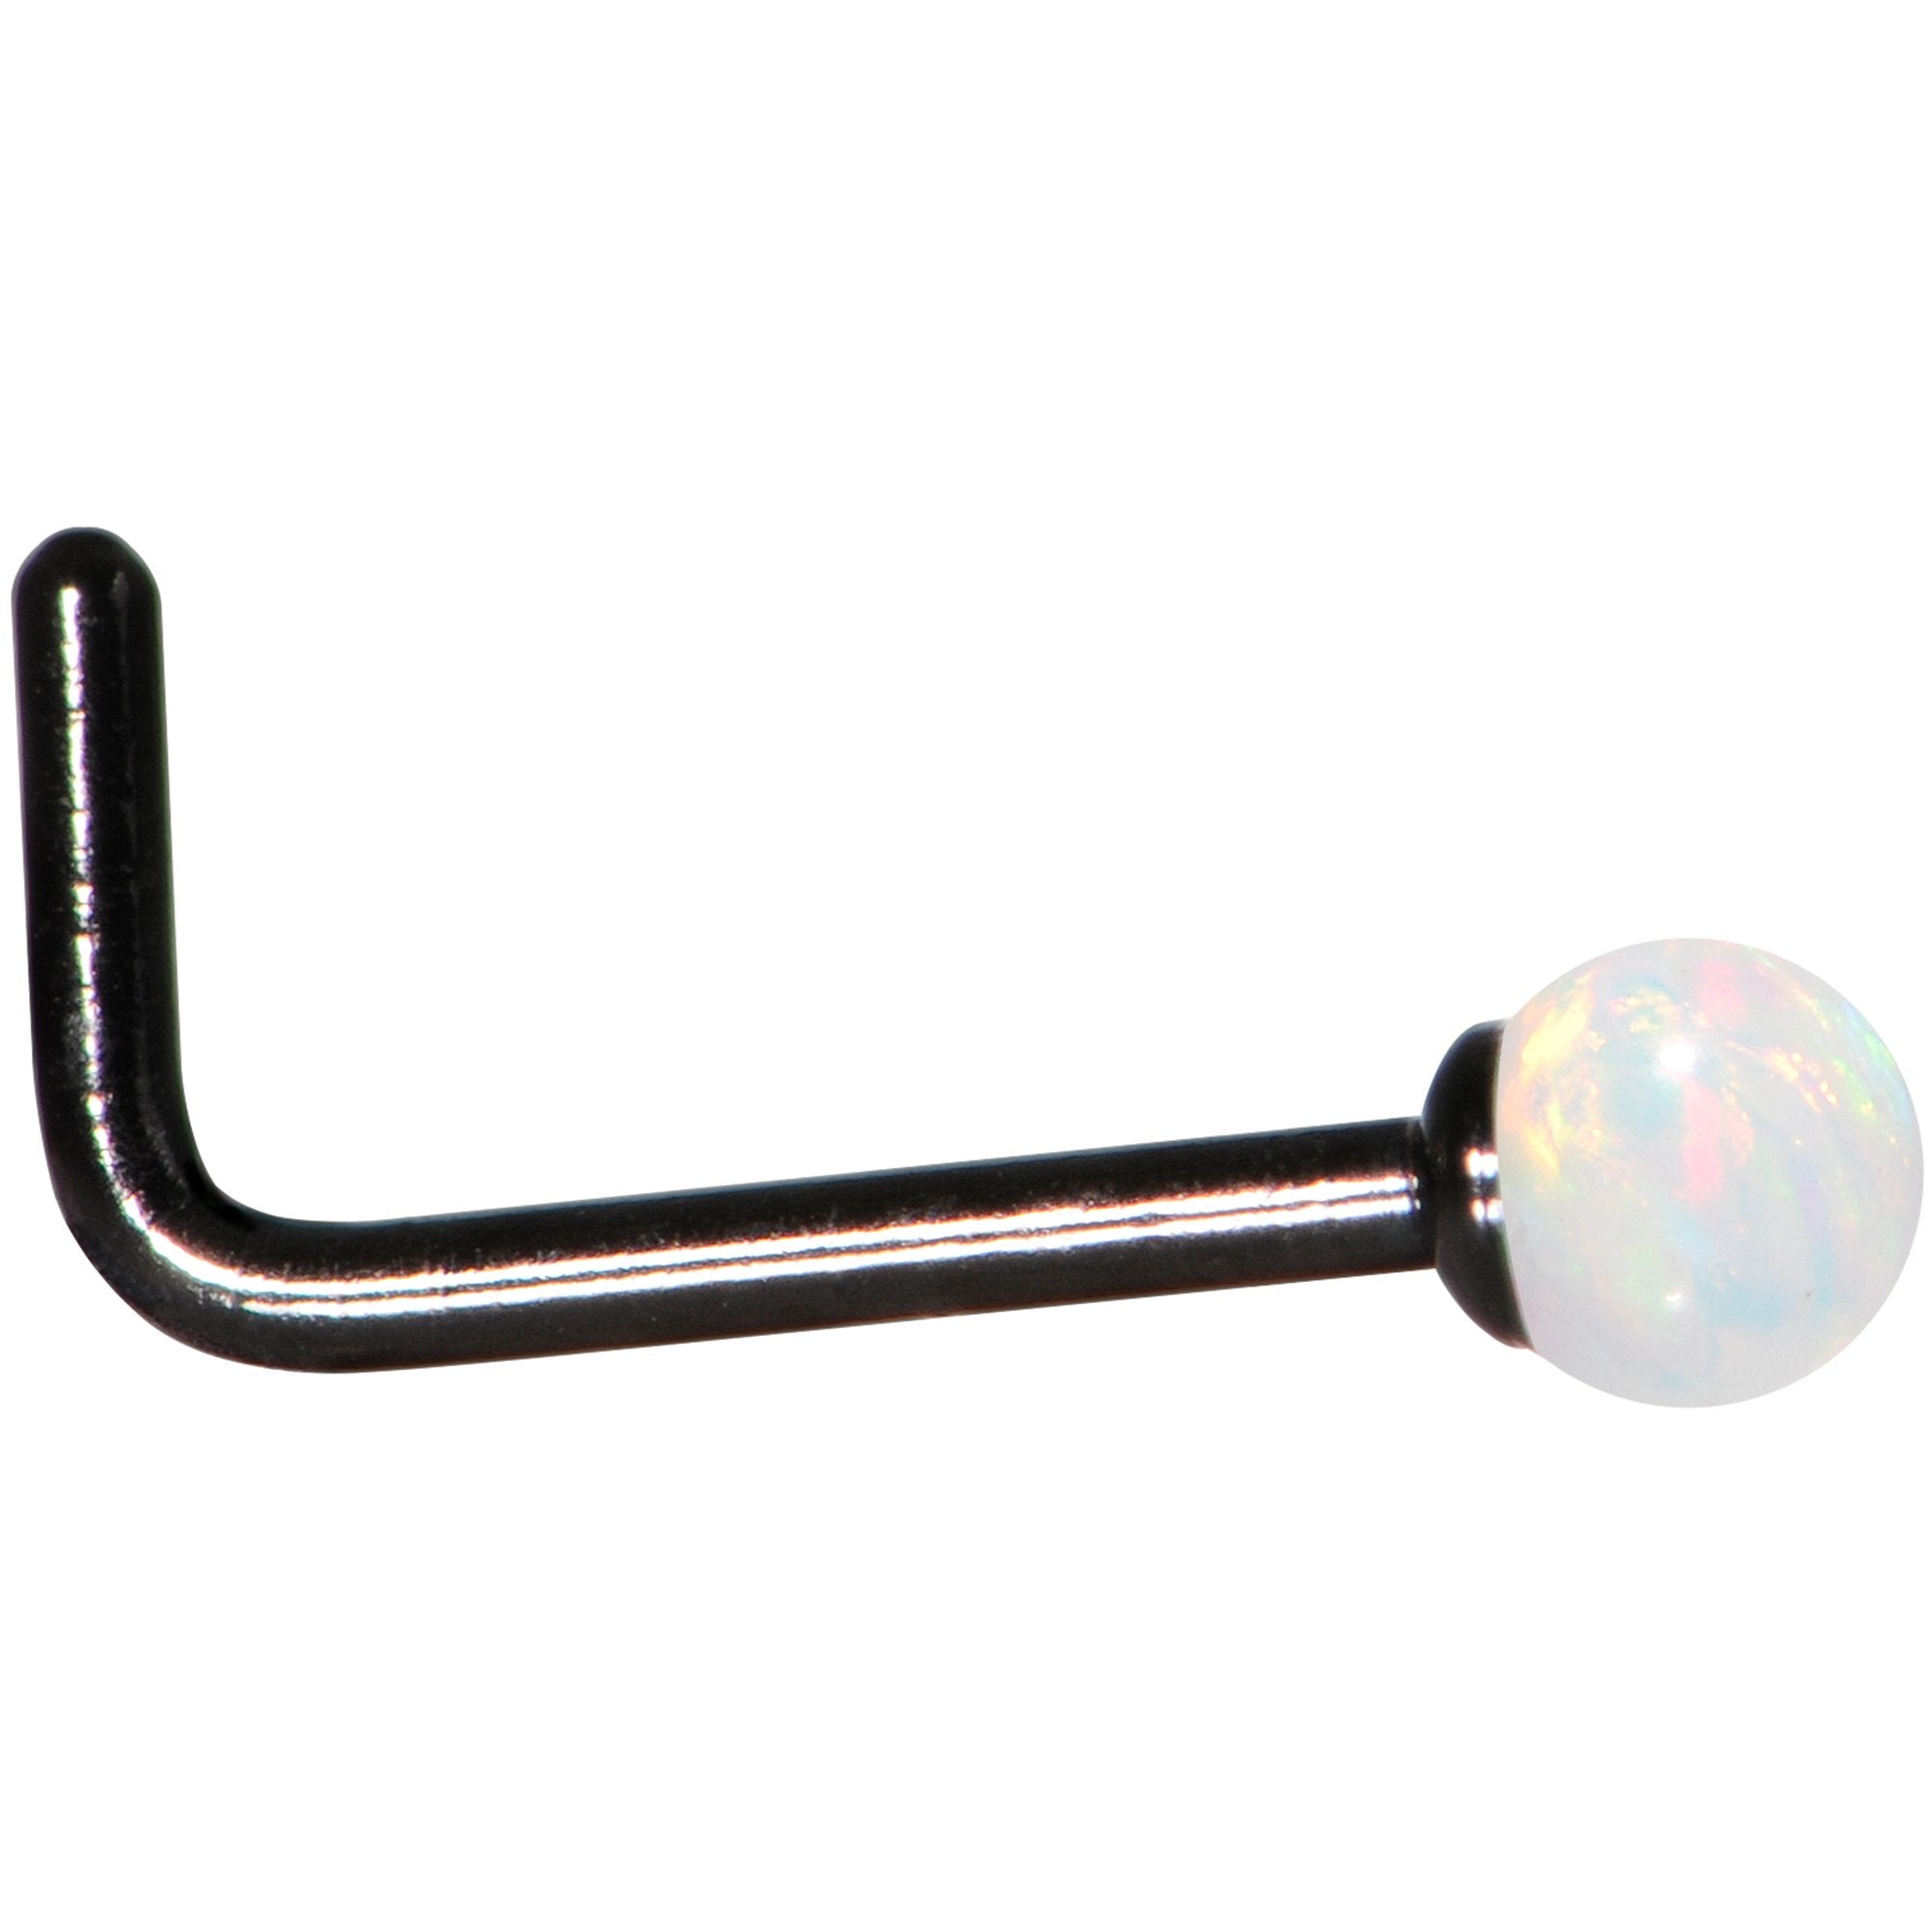 White 2.5mm Synthetic Opal Ball Anodized L Shaped Nose Ring 4 Pack Set